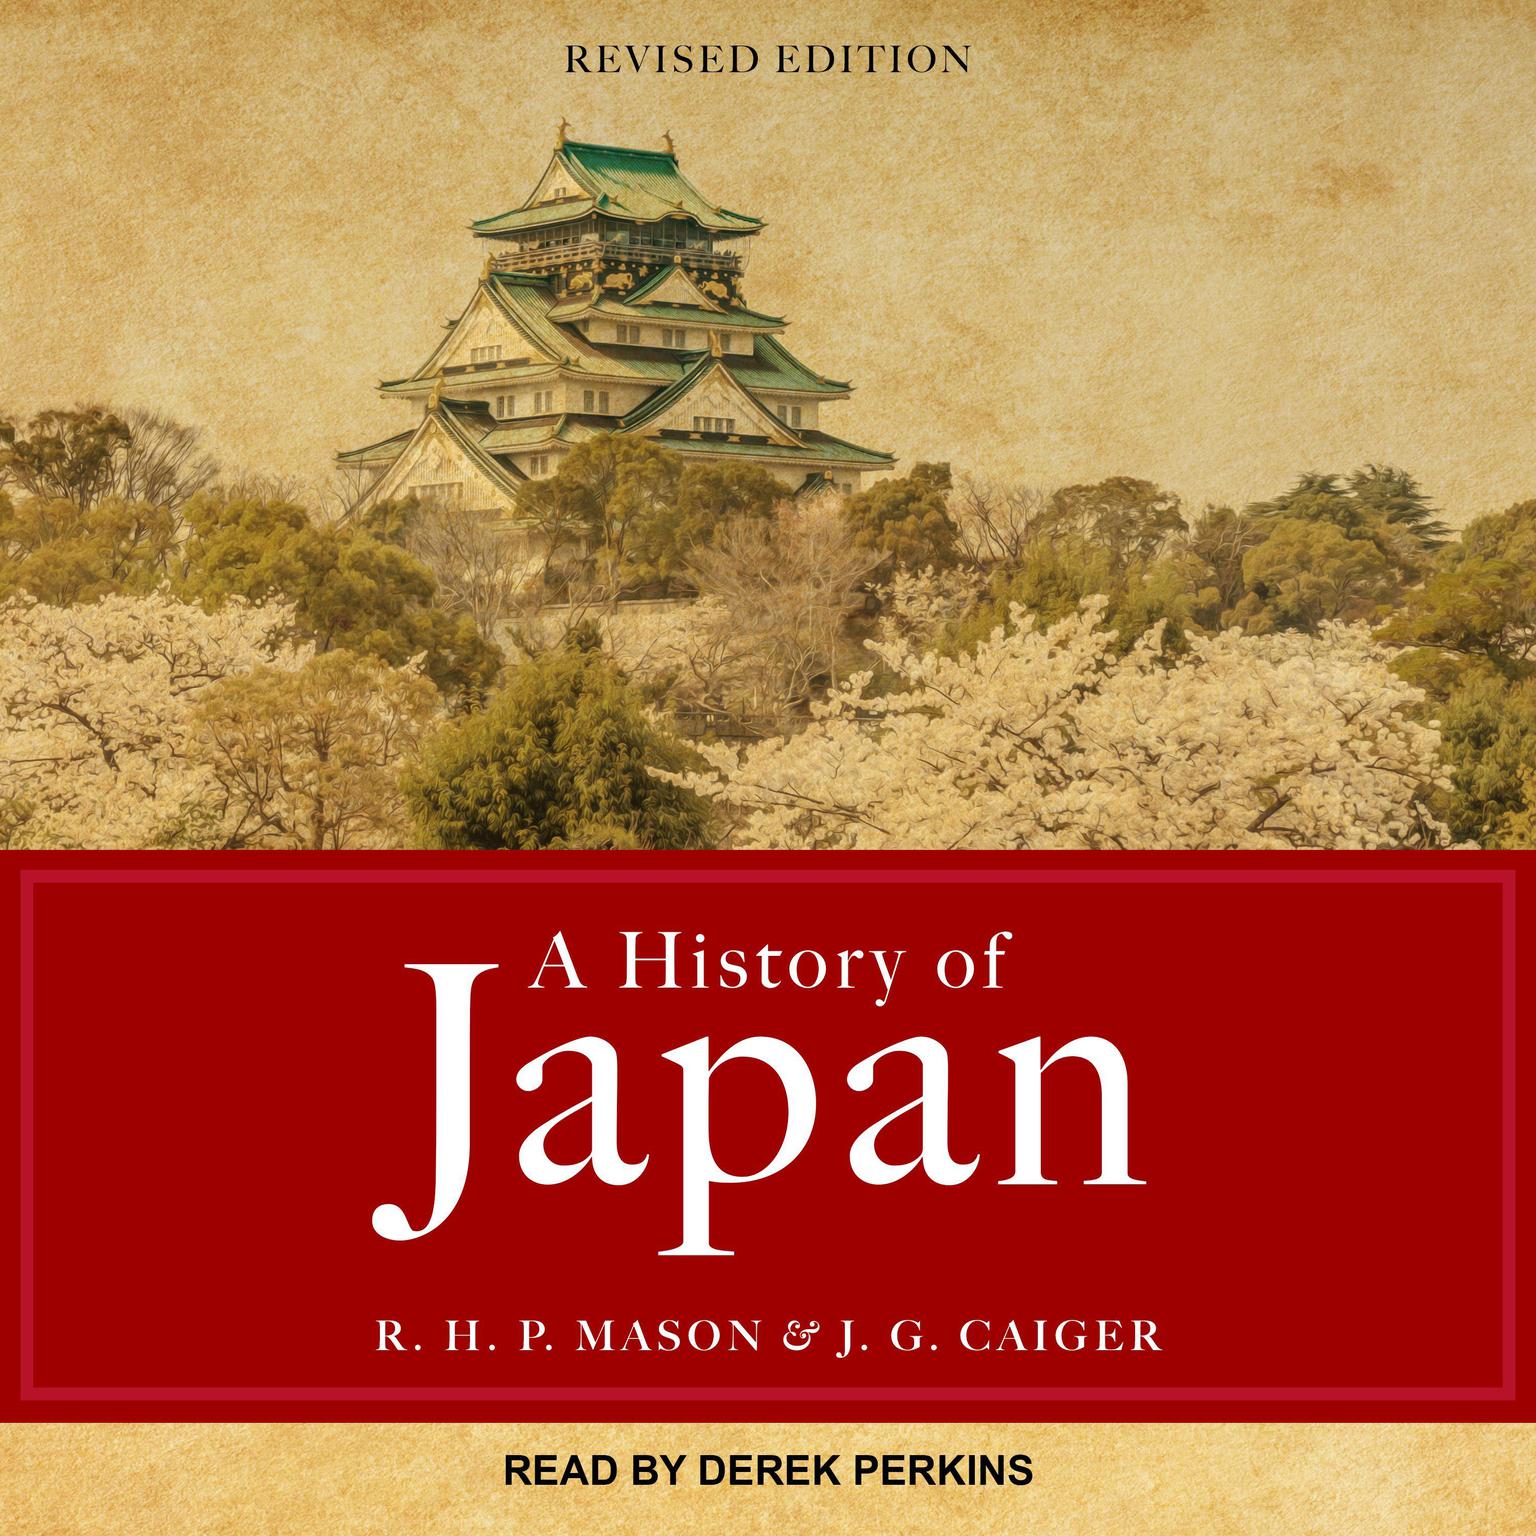 japan in The history